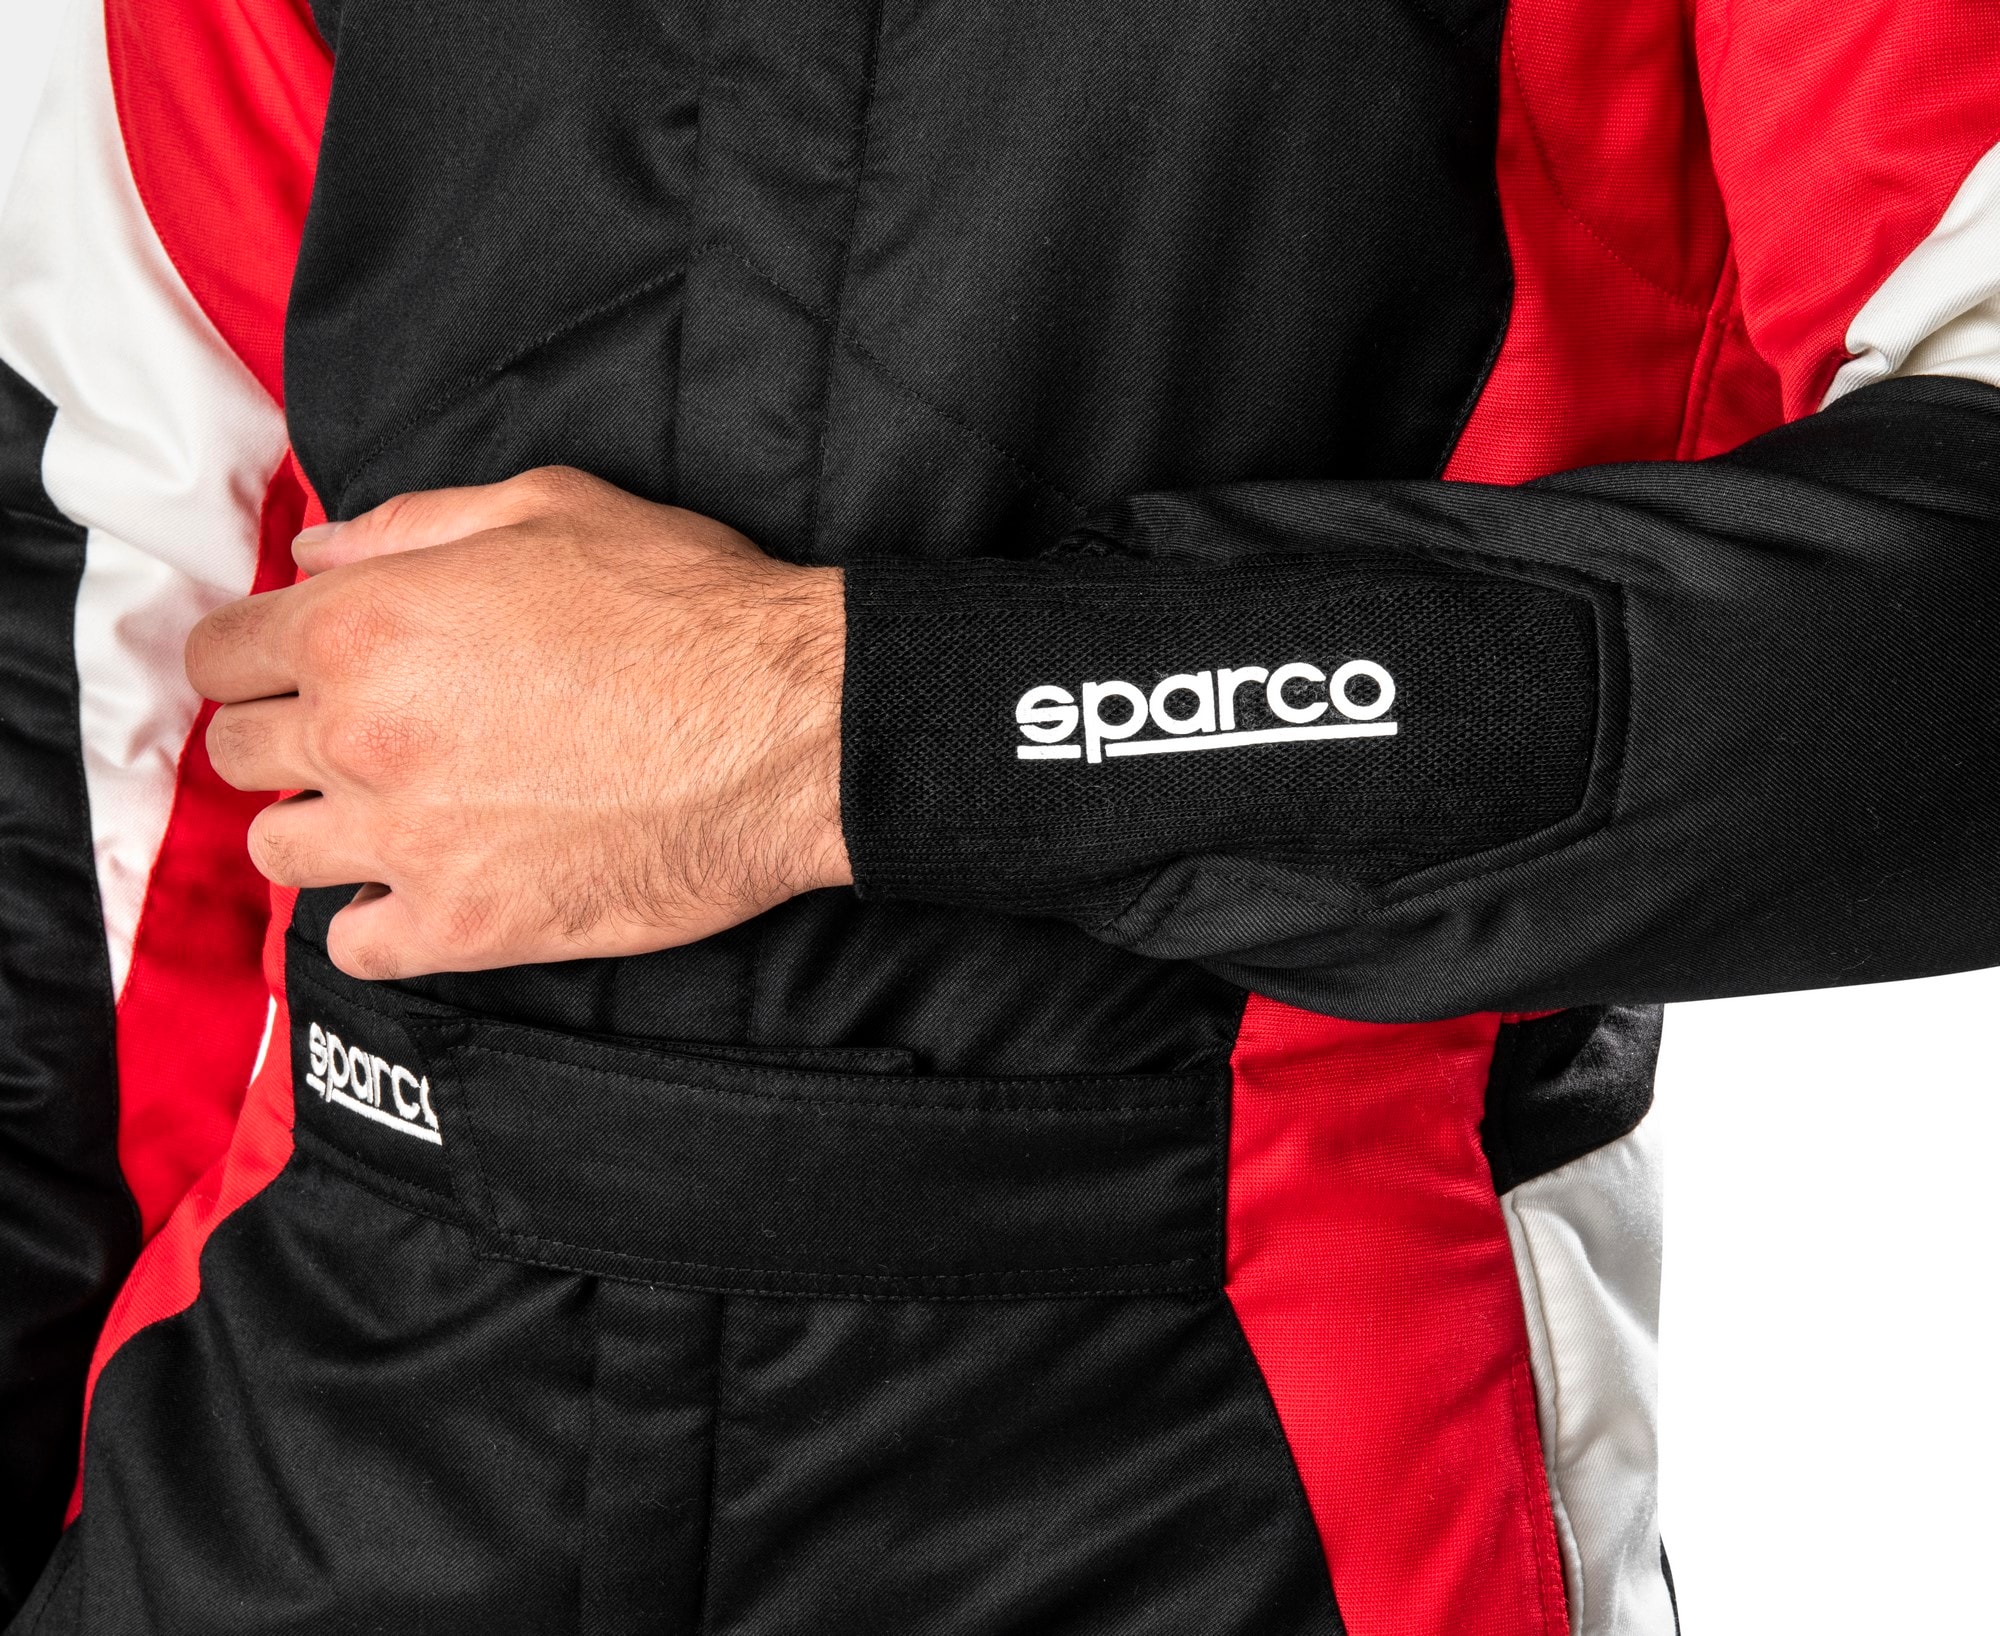 Sparco Competition R567 Sort/Rød